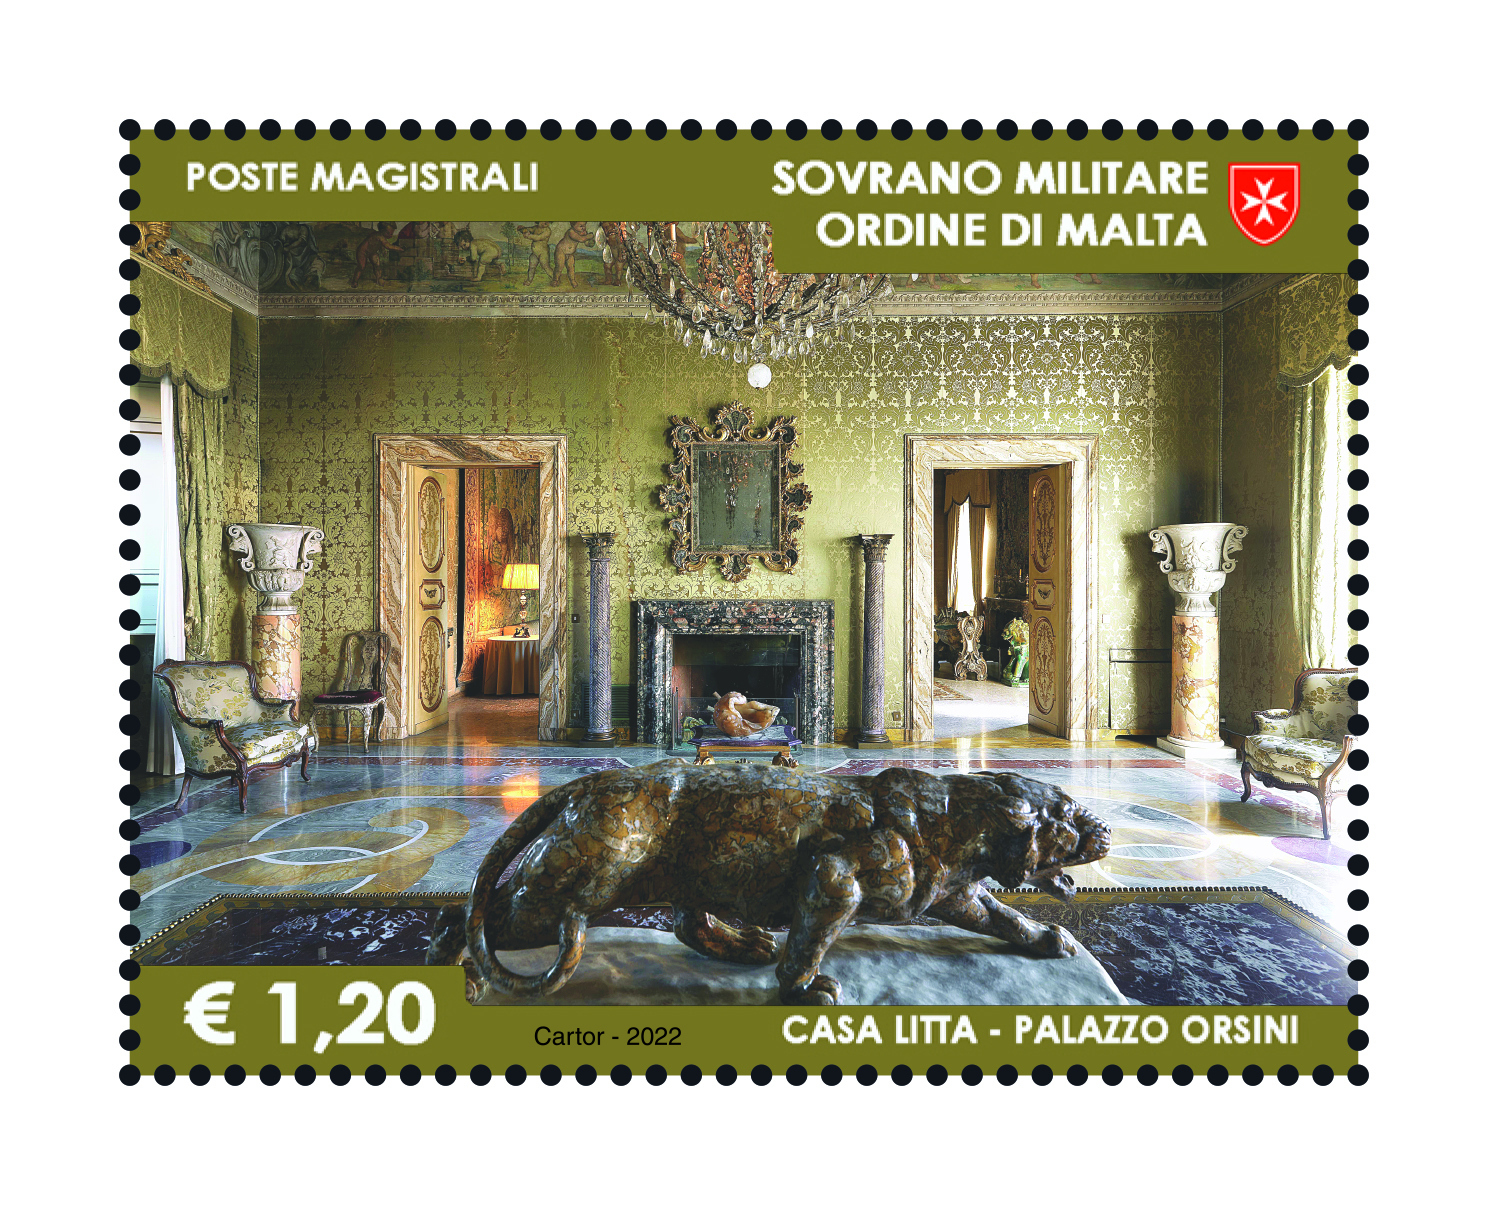 Emission of stamps dedicated to Palazzo Orsini